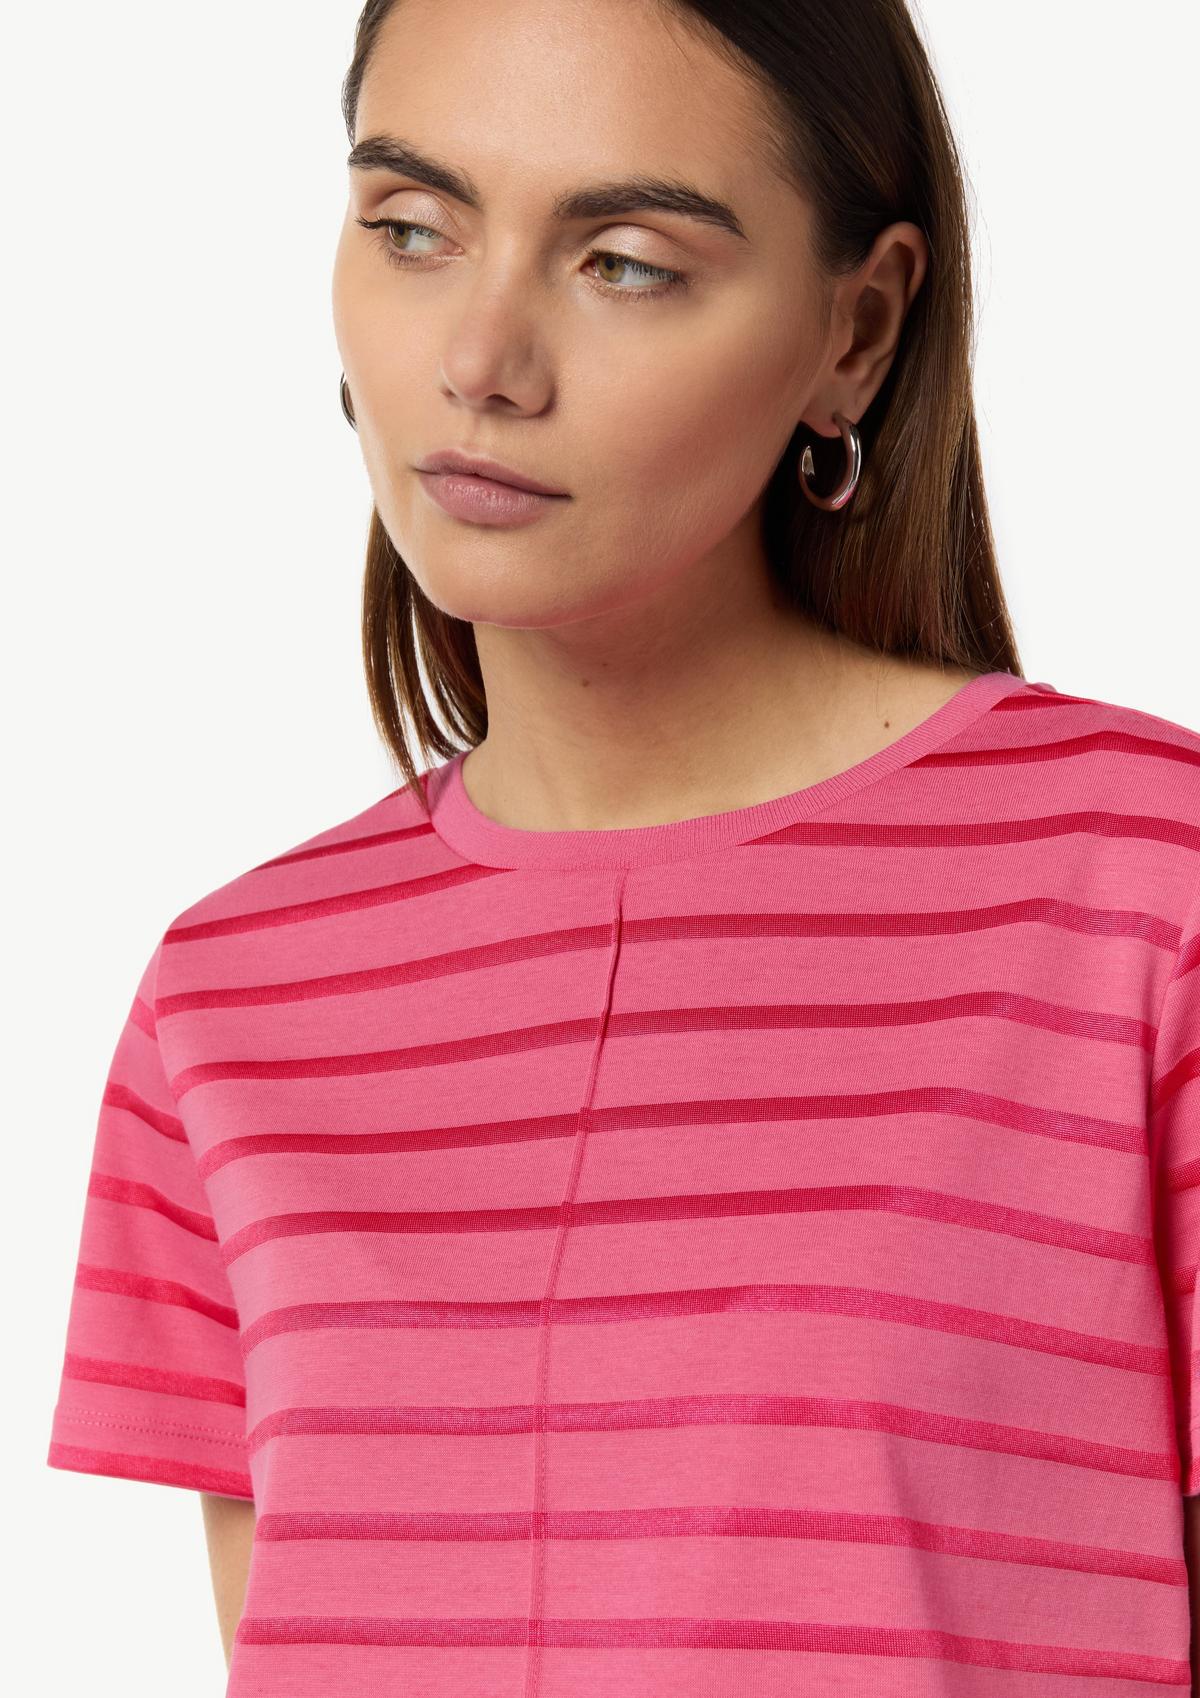 comma T-shirt with stripe pattern